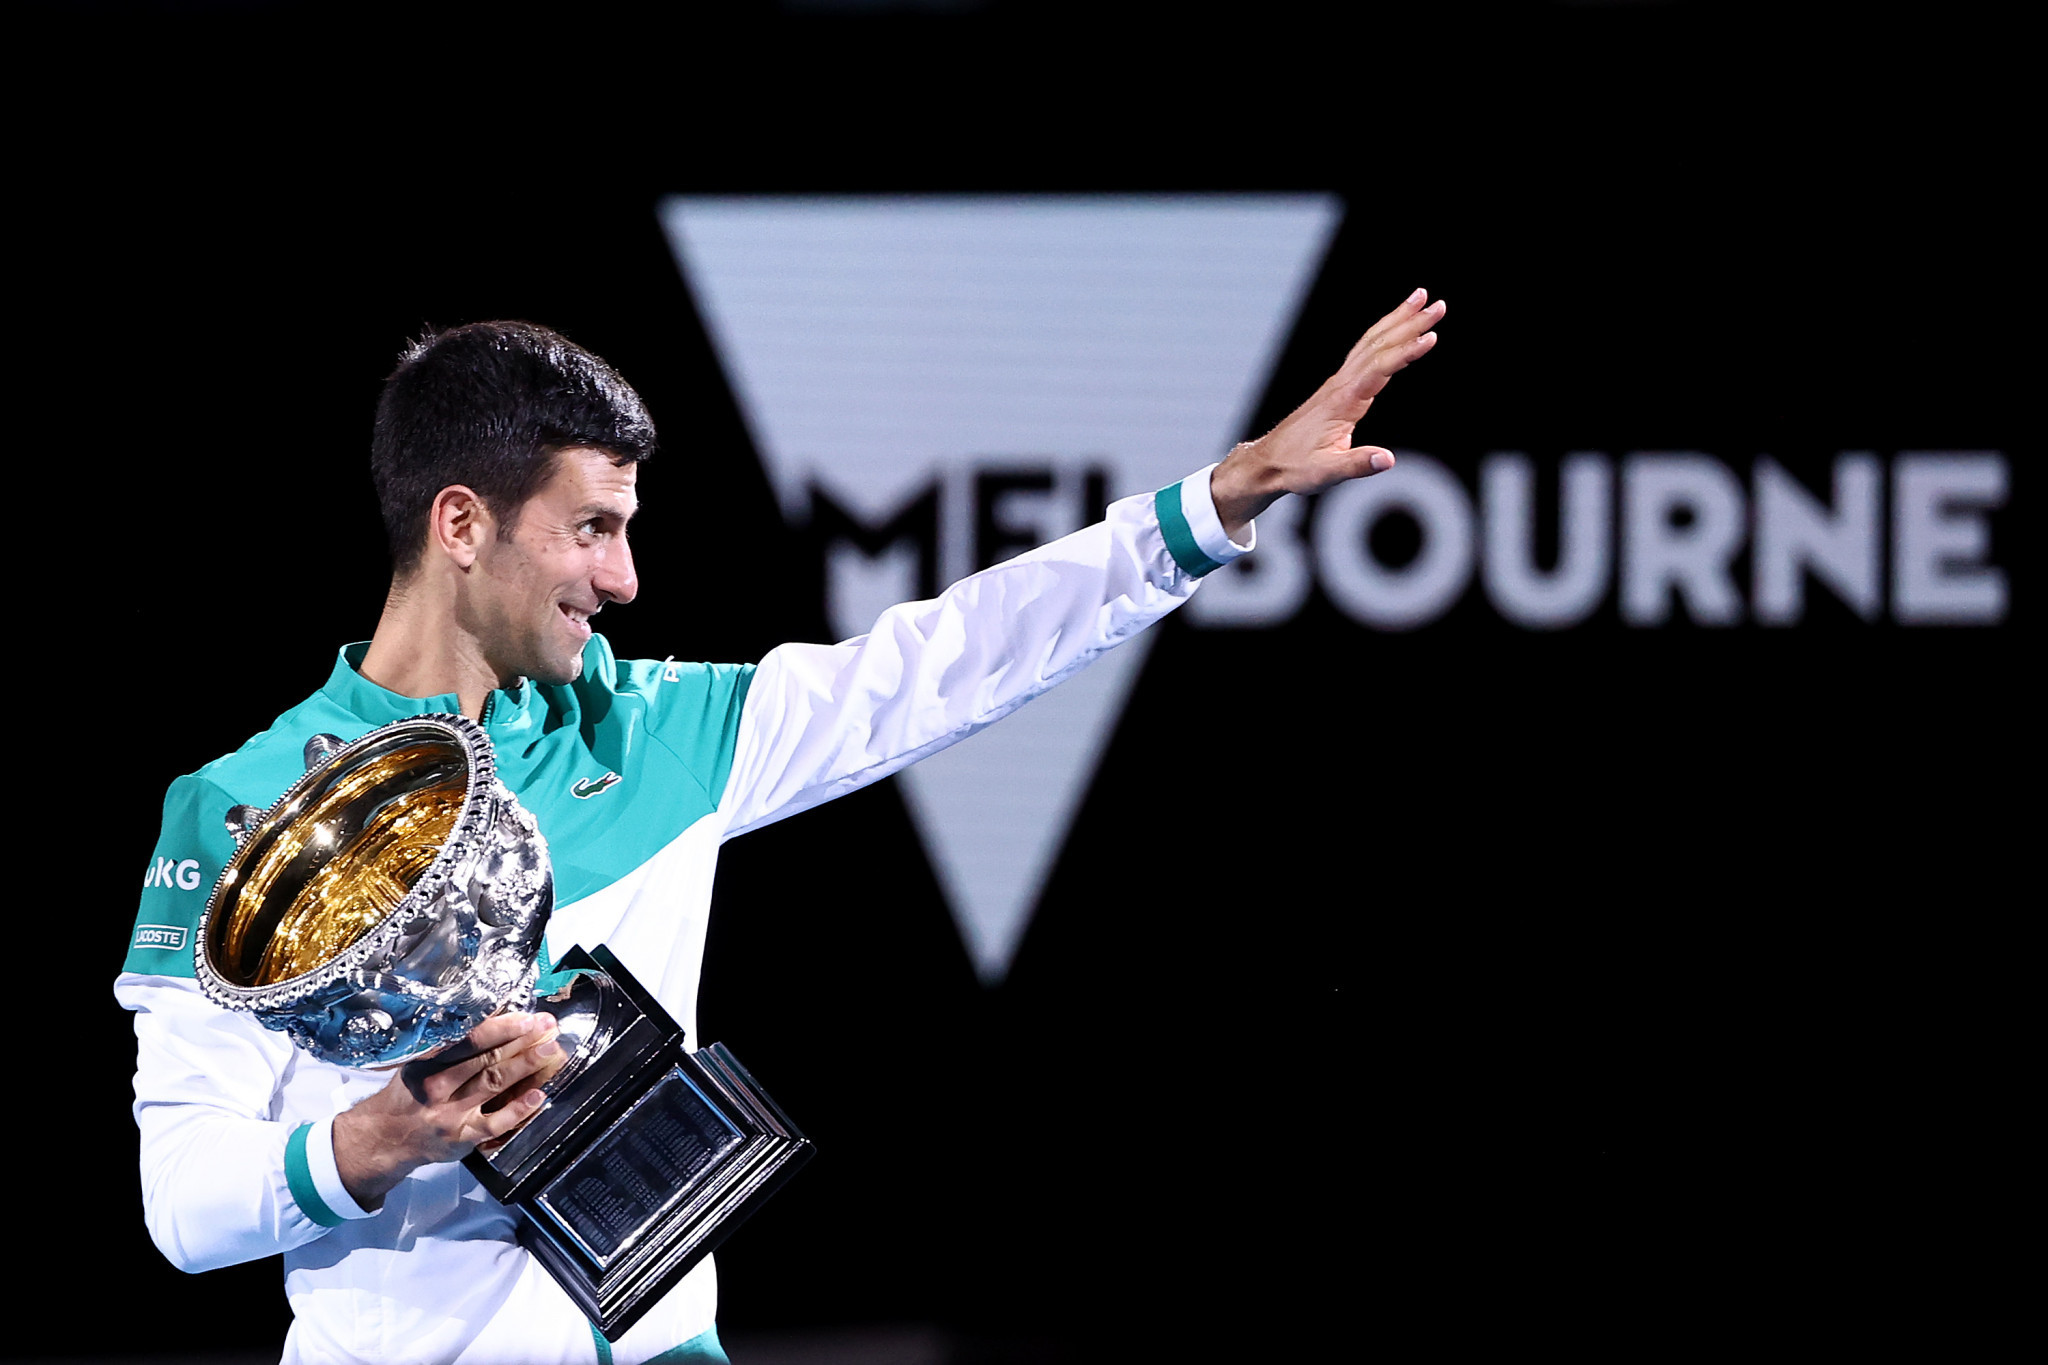 Djokovic waves to his supporters after collecting the trophy for the ninth time ©Getty Images